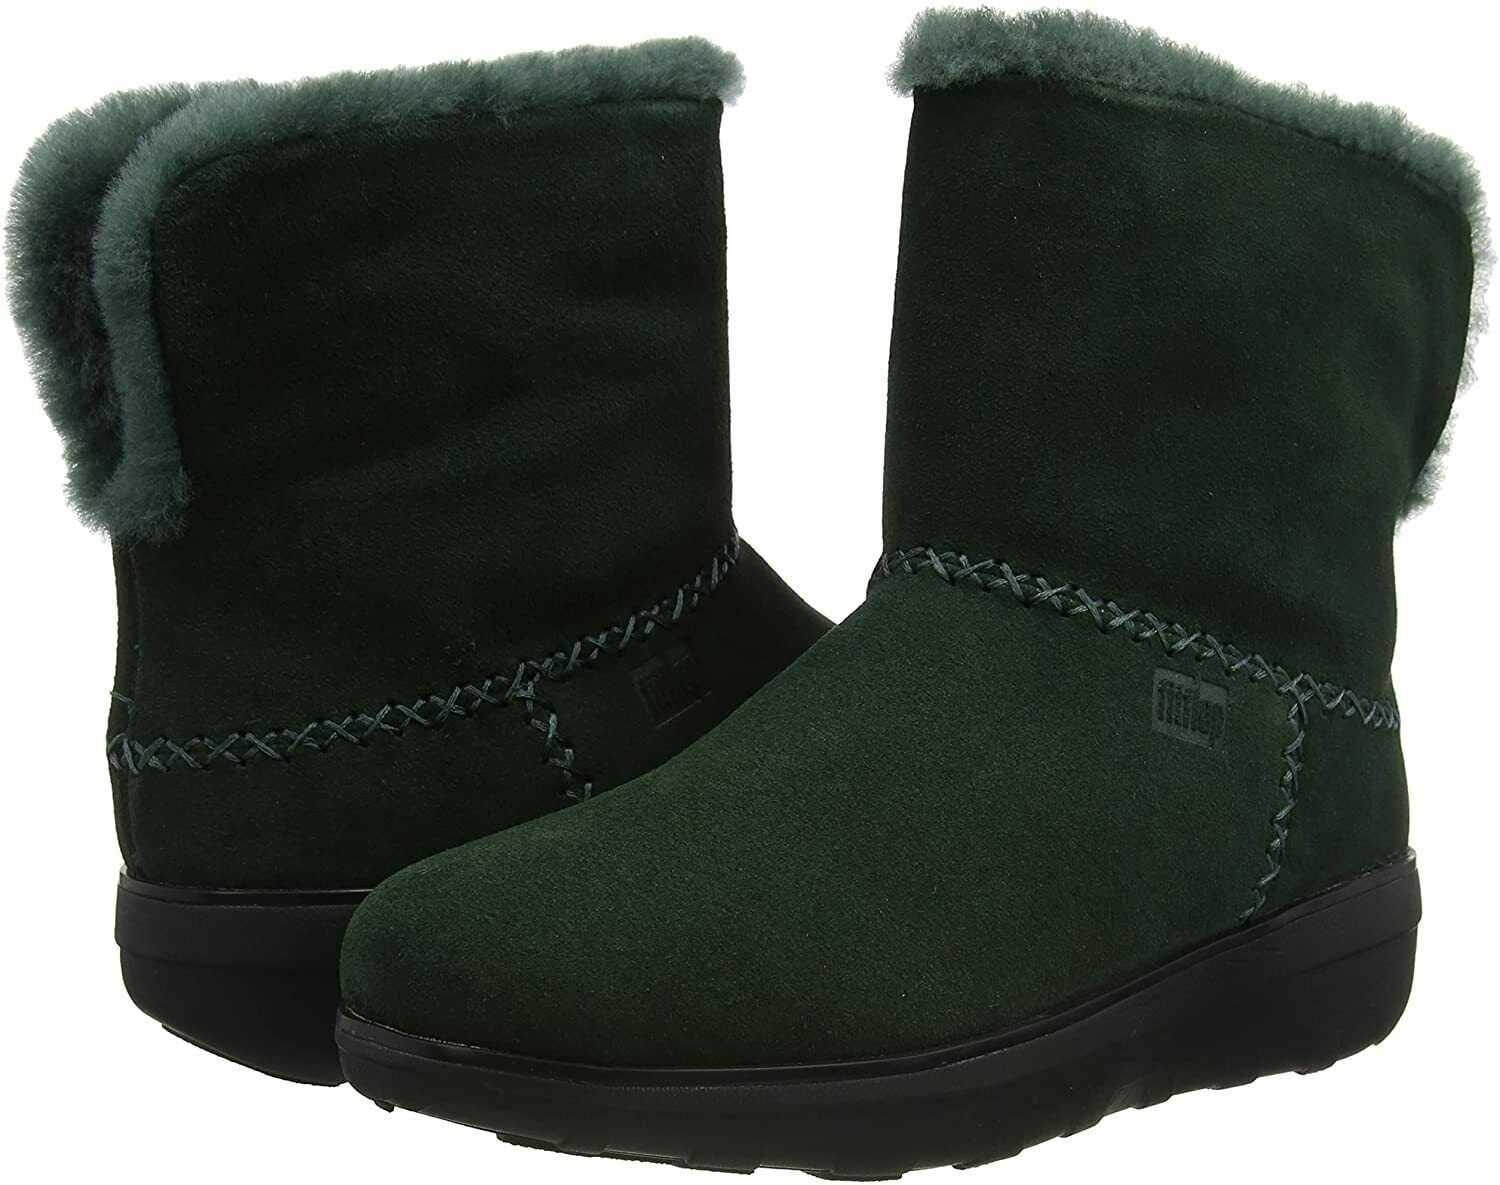 Overbevisende Antarktis marked FitFlop Women's Mukluk Shorty III Suede Ankle Boots Y88-899 - Walmart.com